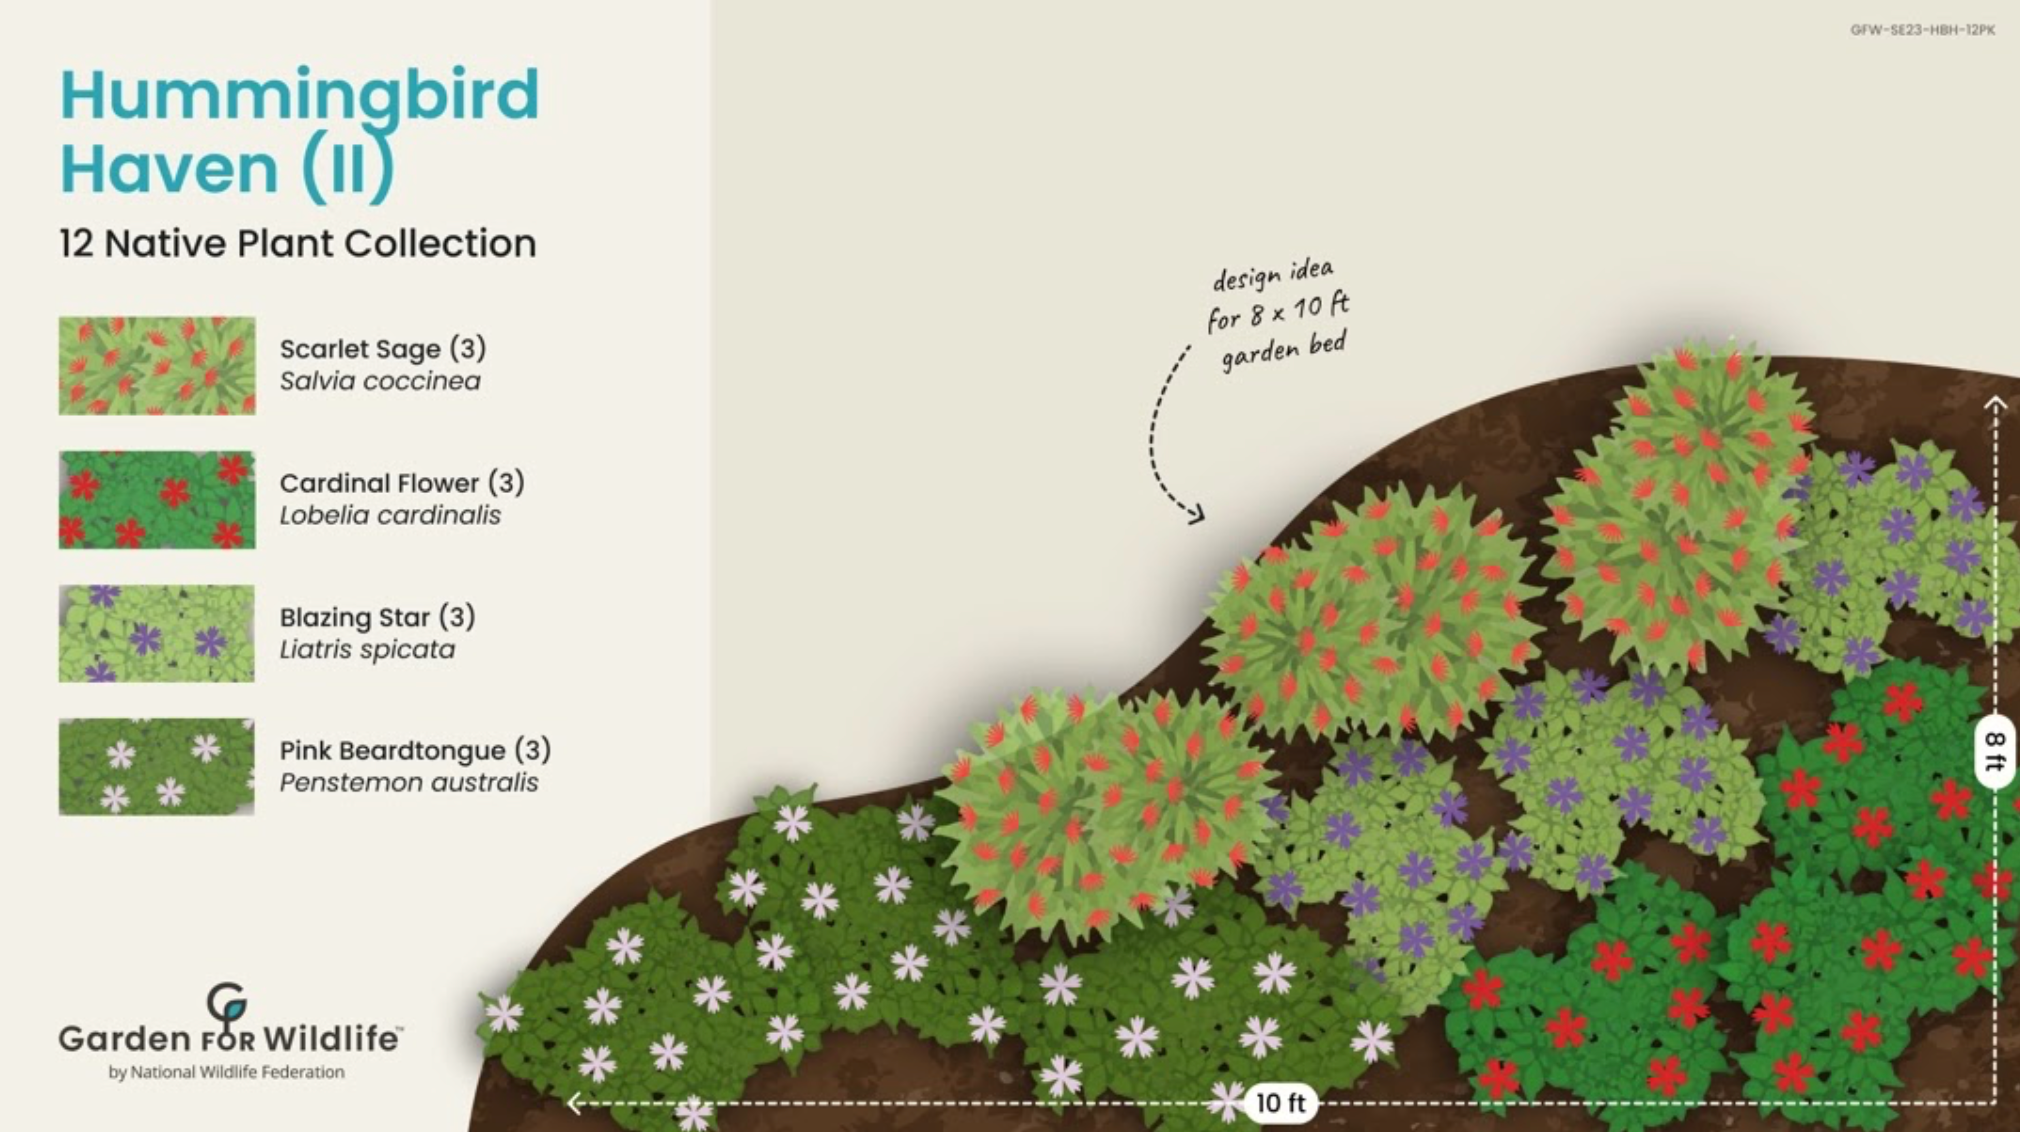 pollinator garden design suggestion layout with native plants for hummingbirds